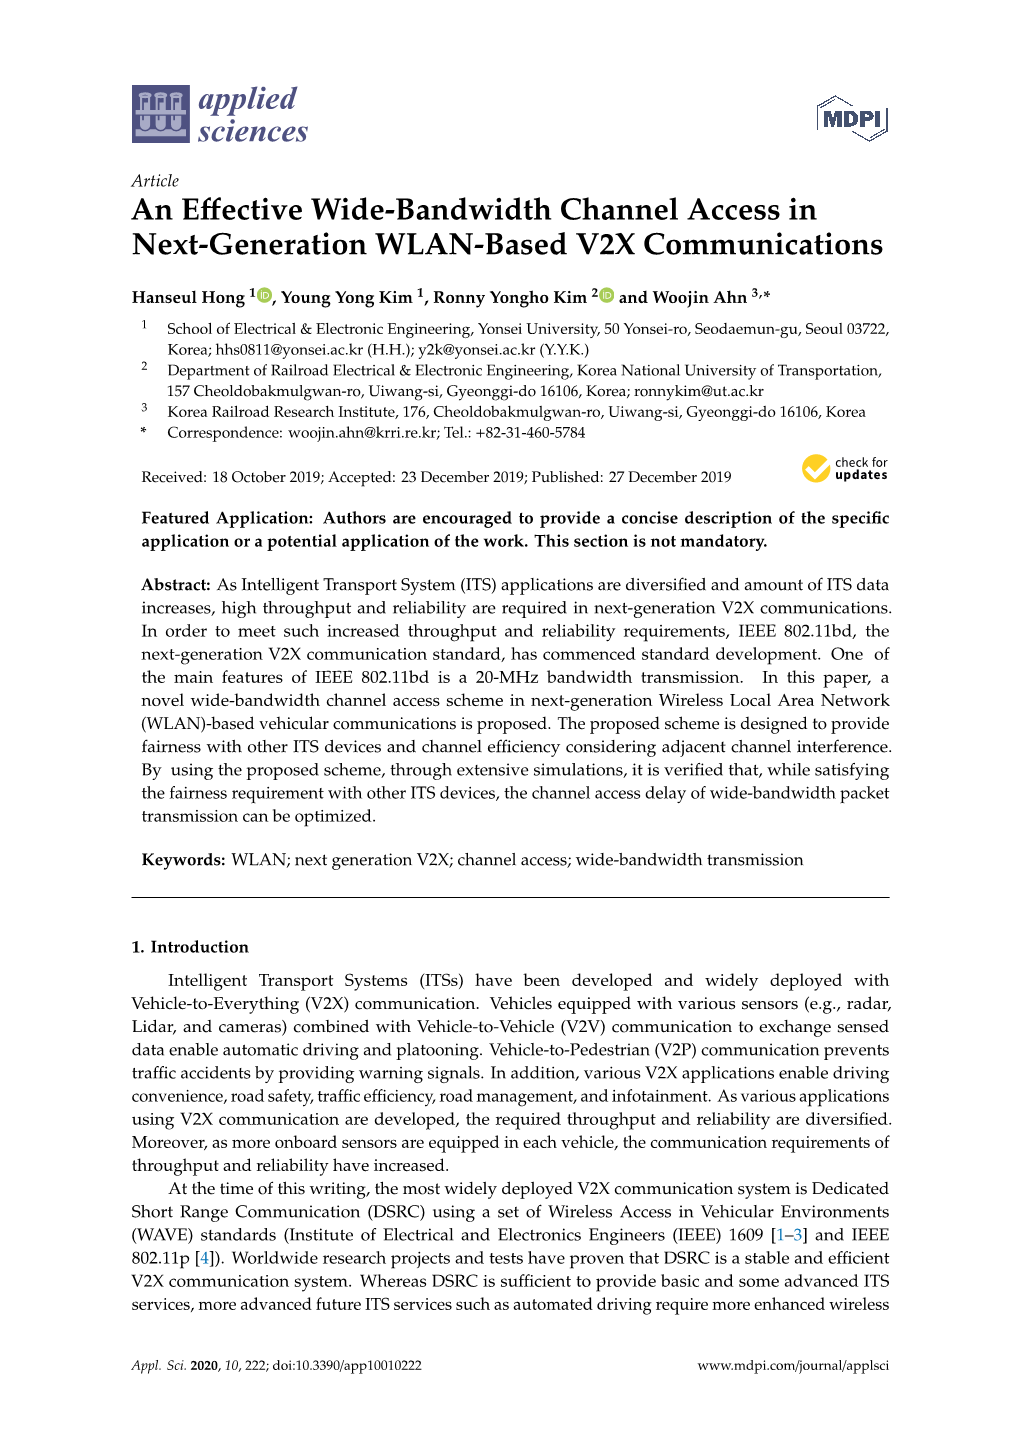 An Effective Wide-Bandwidth Channel Access in Next-Generation WLAN-Based V2X Communications